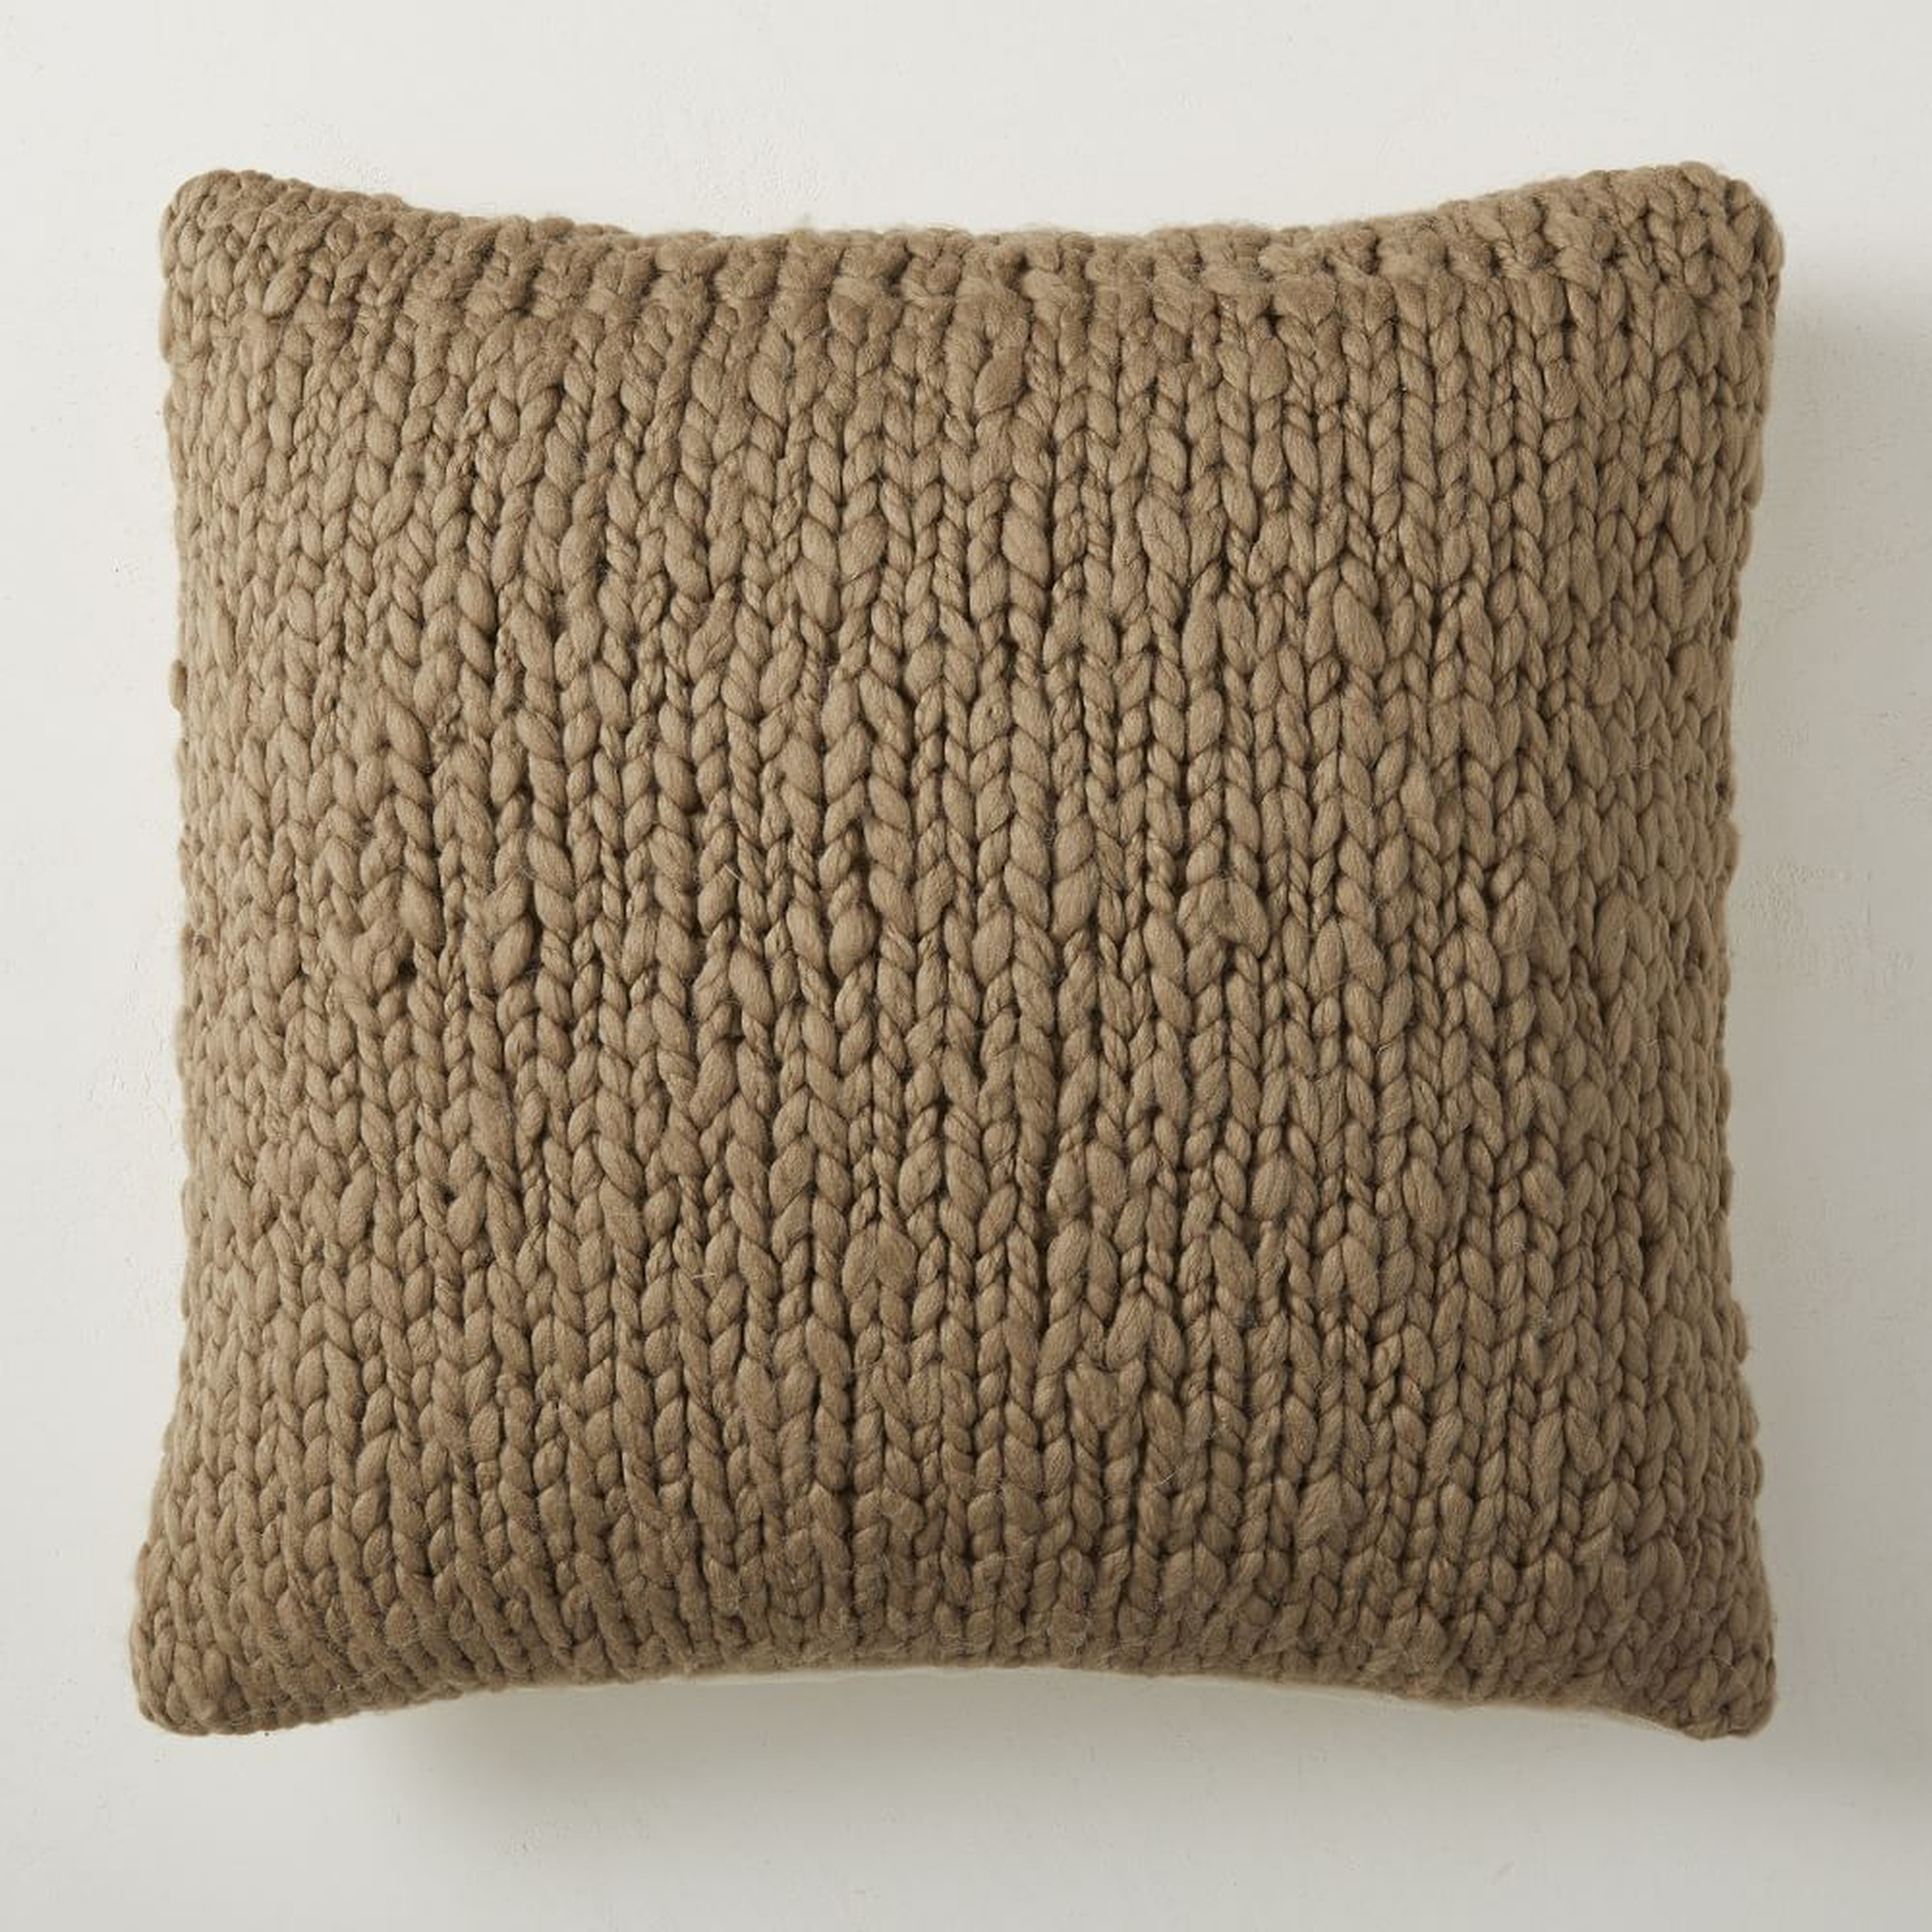 Wool Knit Pillow Cover, 20"x20", Clay - West Elm